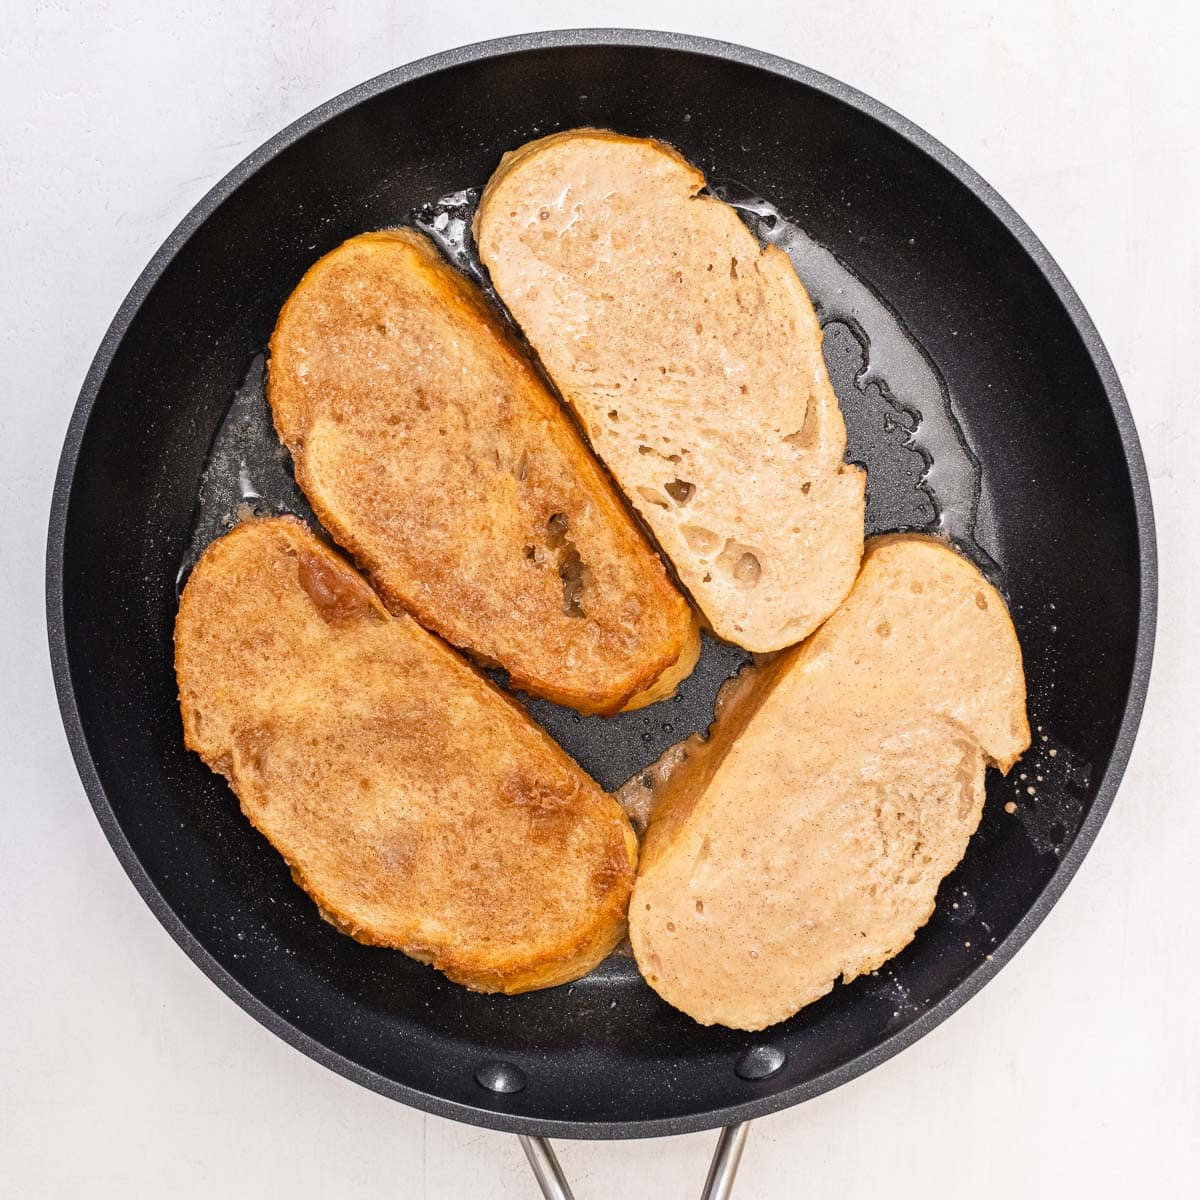 frying 4 slices of vegan french toast